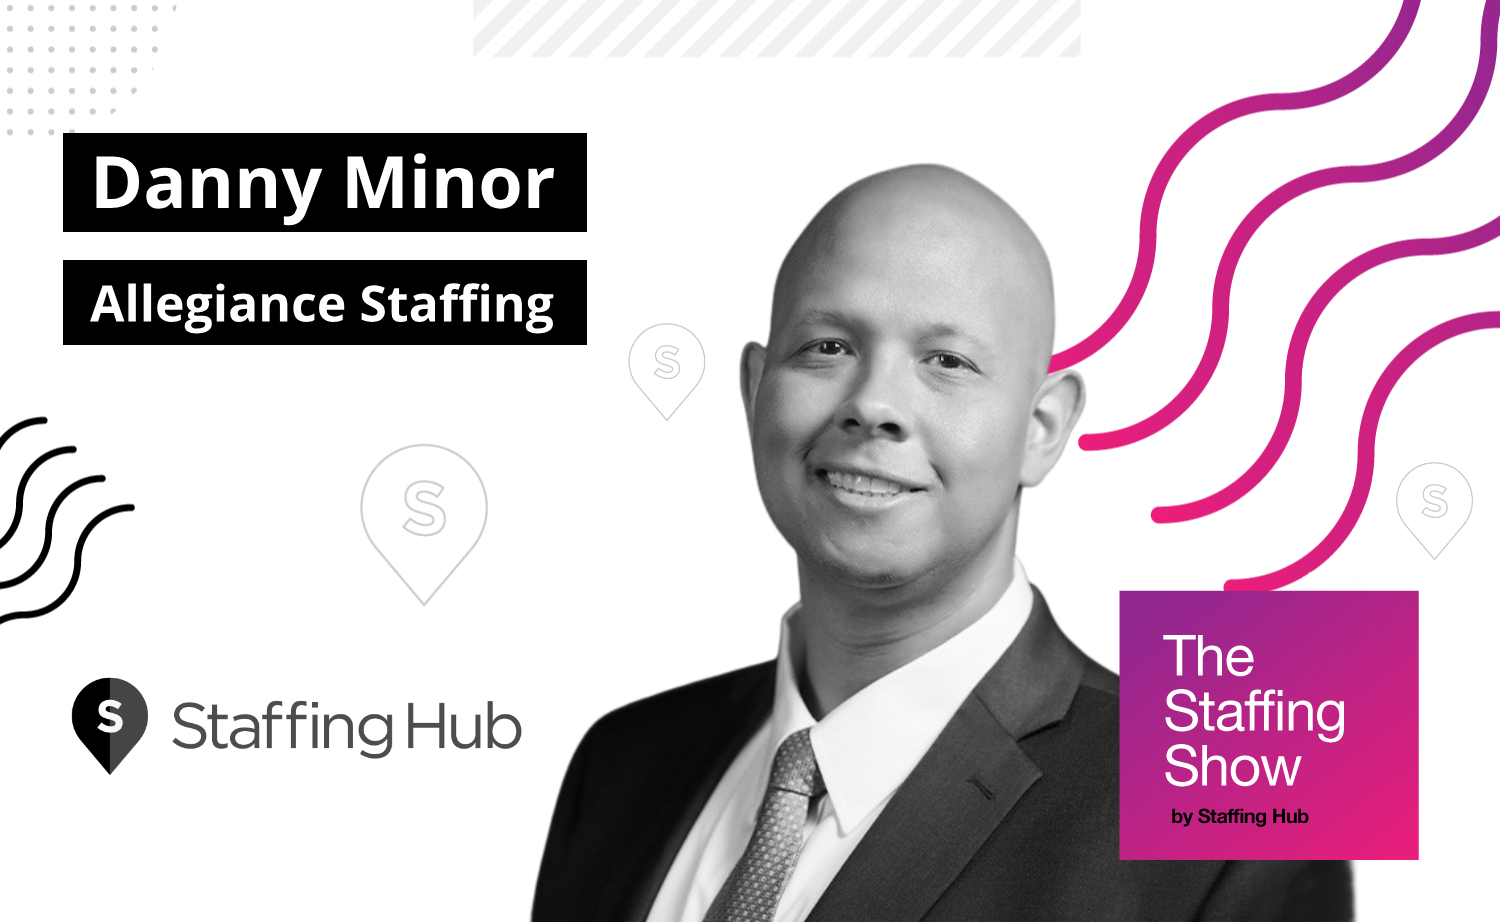 Danny Minor, President and Partner at Allegiance Staffing, on Technology in the Staffing Industry